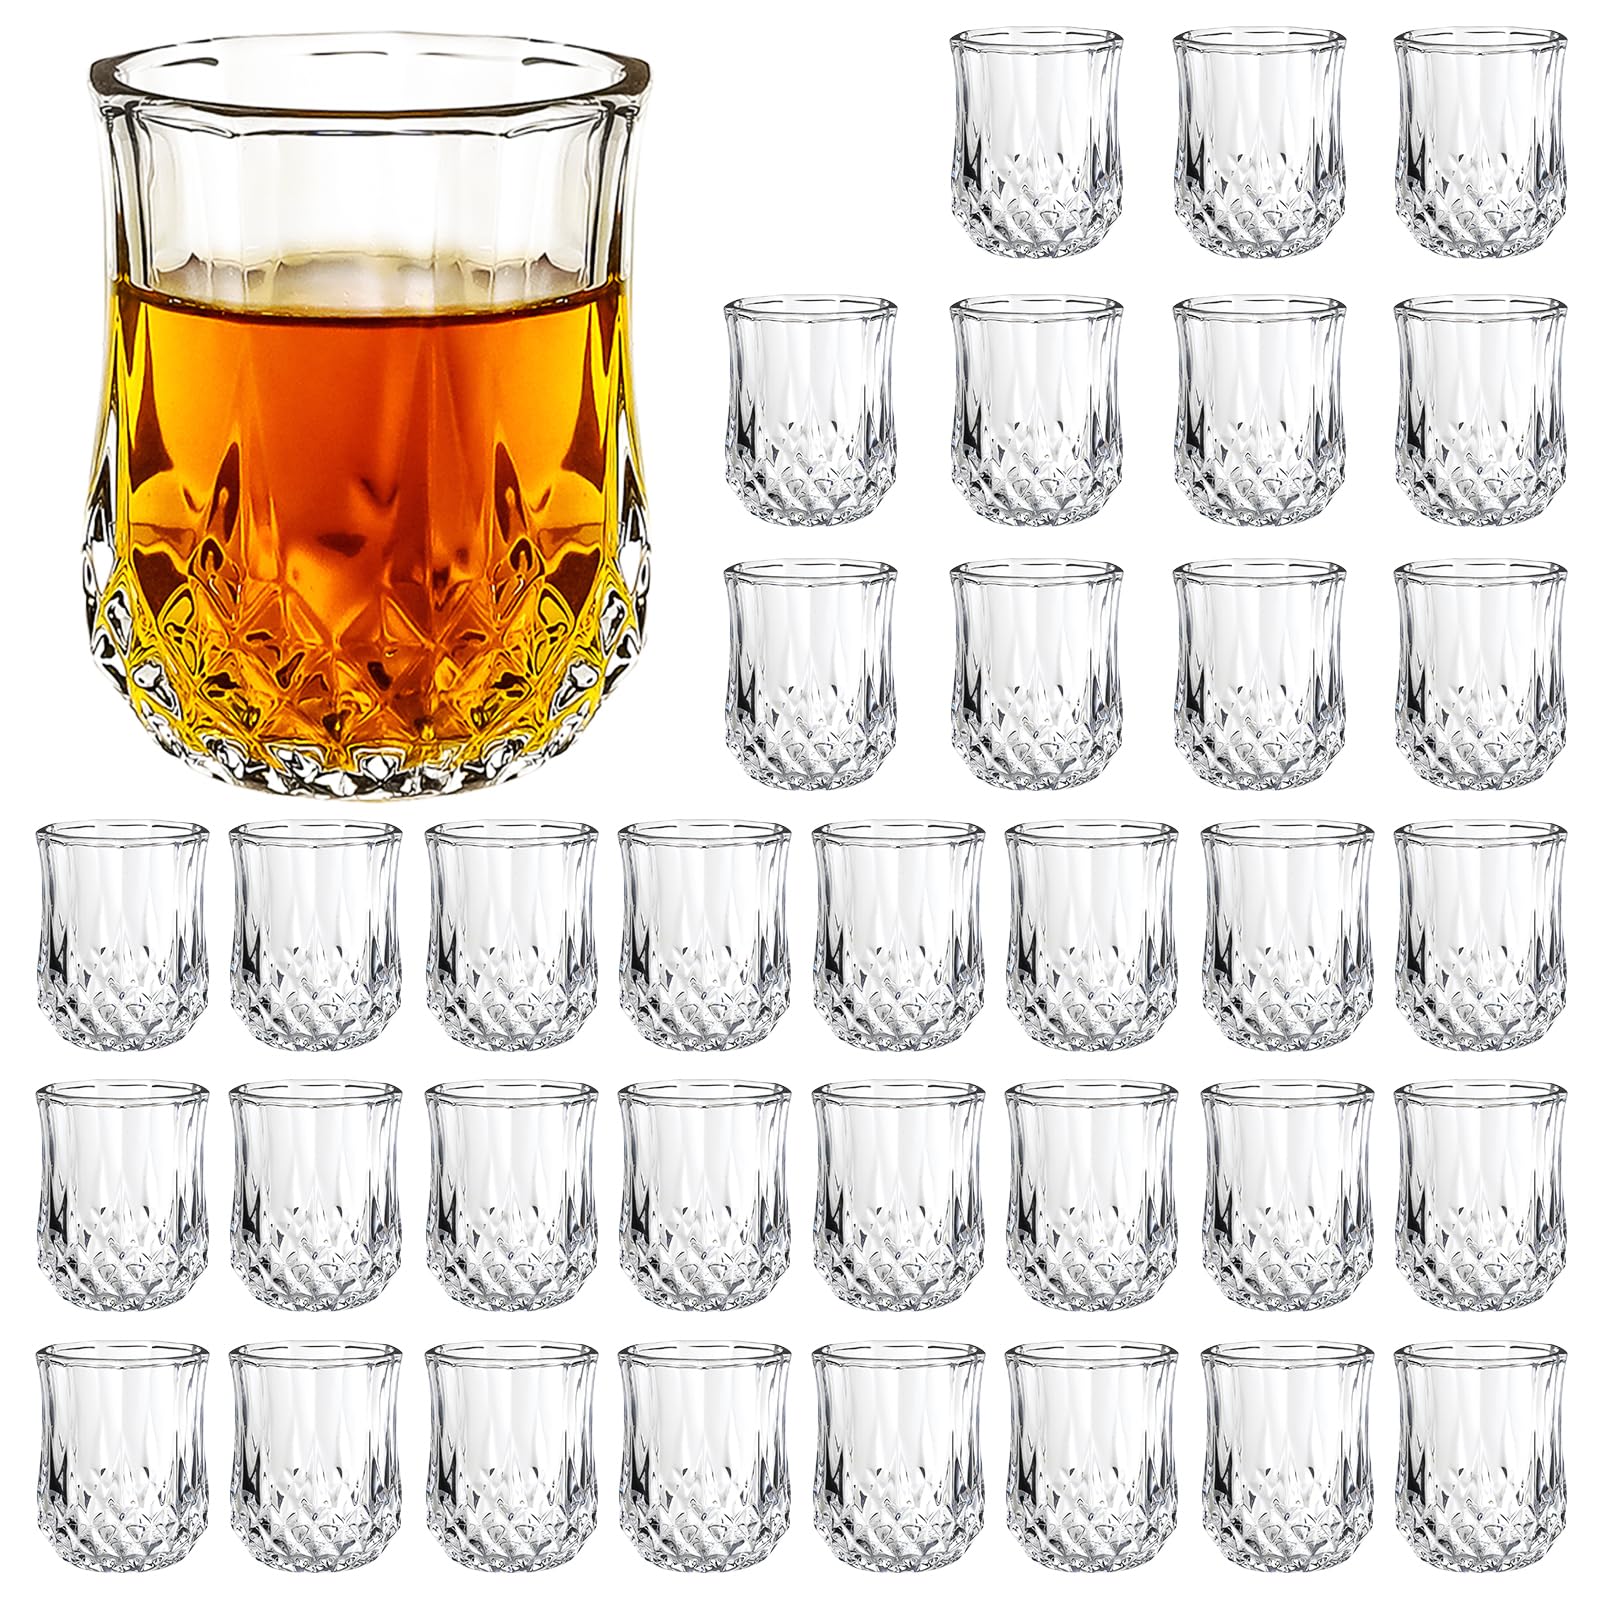 INFTYLE Shot Glasses Set of 36-1.5oz Clear Glasses Shot Glass Set with Heavy Base Whiskey Glasses Great for Vodka Tequila, Cocktail